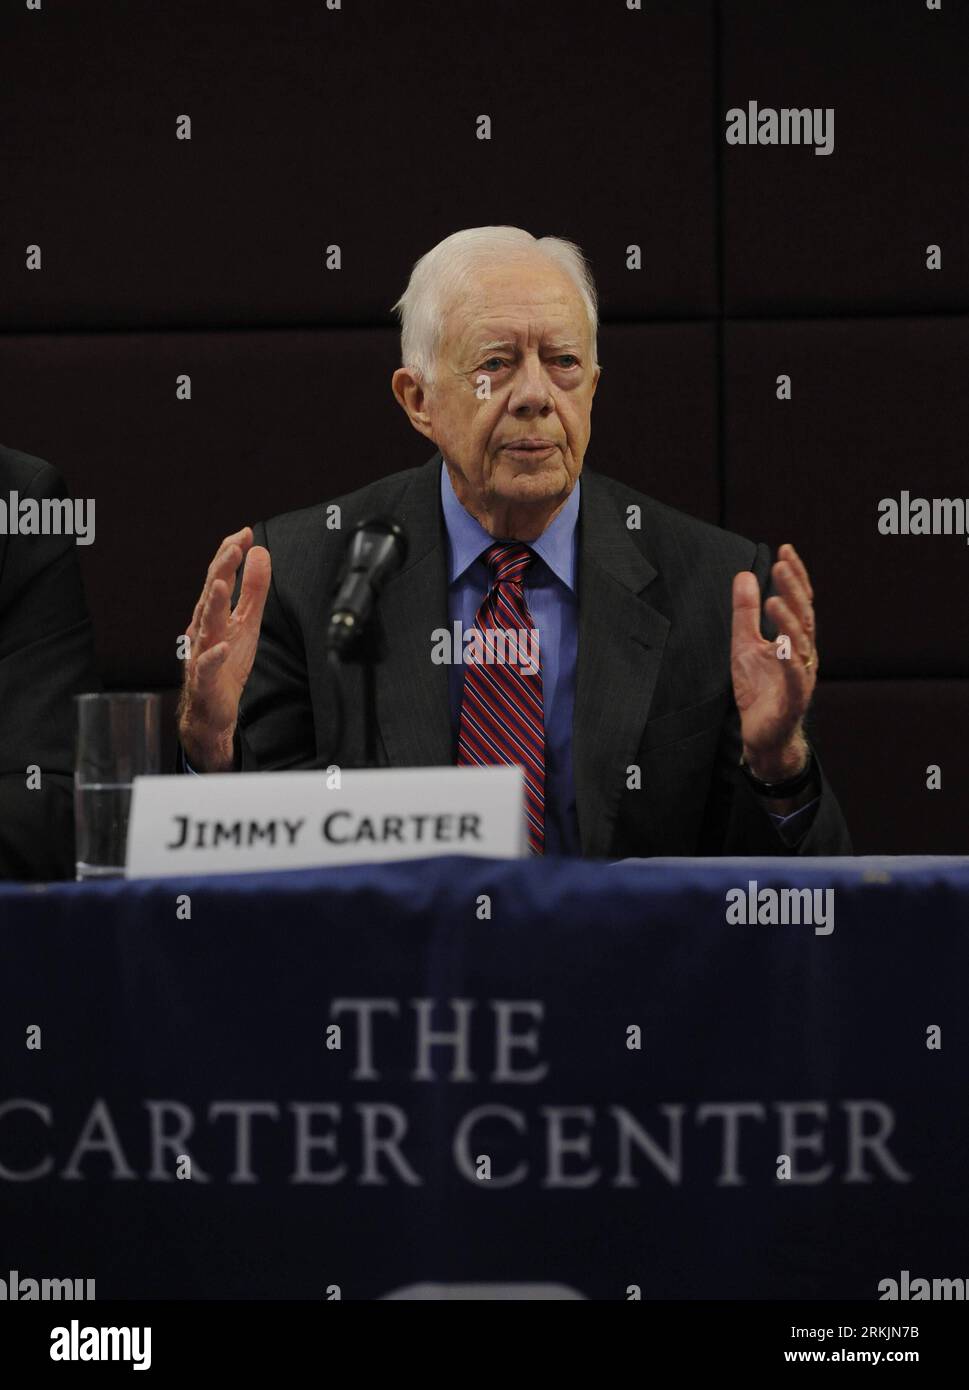 Bildnummer: 56148477  Datum: 05.10.2011  Copyright: imago/Xinhua (111005) -- LONDON, Oct. 5, 2011 (Xinhua) -- Former US President Jimmy Carter addresses the press conference announcing the new funding campaign for the eradication of Guinea worm disease, in London Oct. 5, 2011. Together Carter announced Wednesday in London the launching of a new major funding campaign to make the Guinea worm disease, once wide-spread in Africa and Asia, the second infectious disease be eradicated by human beings after smallpox. (Xinhua/Zeng Yi) (wn) UK-LONDON-JIMMY CARTER-WHO-GUINEA WORM DISEASE-ERADICATION PUB Stock Photo